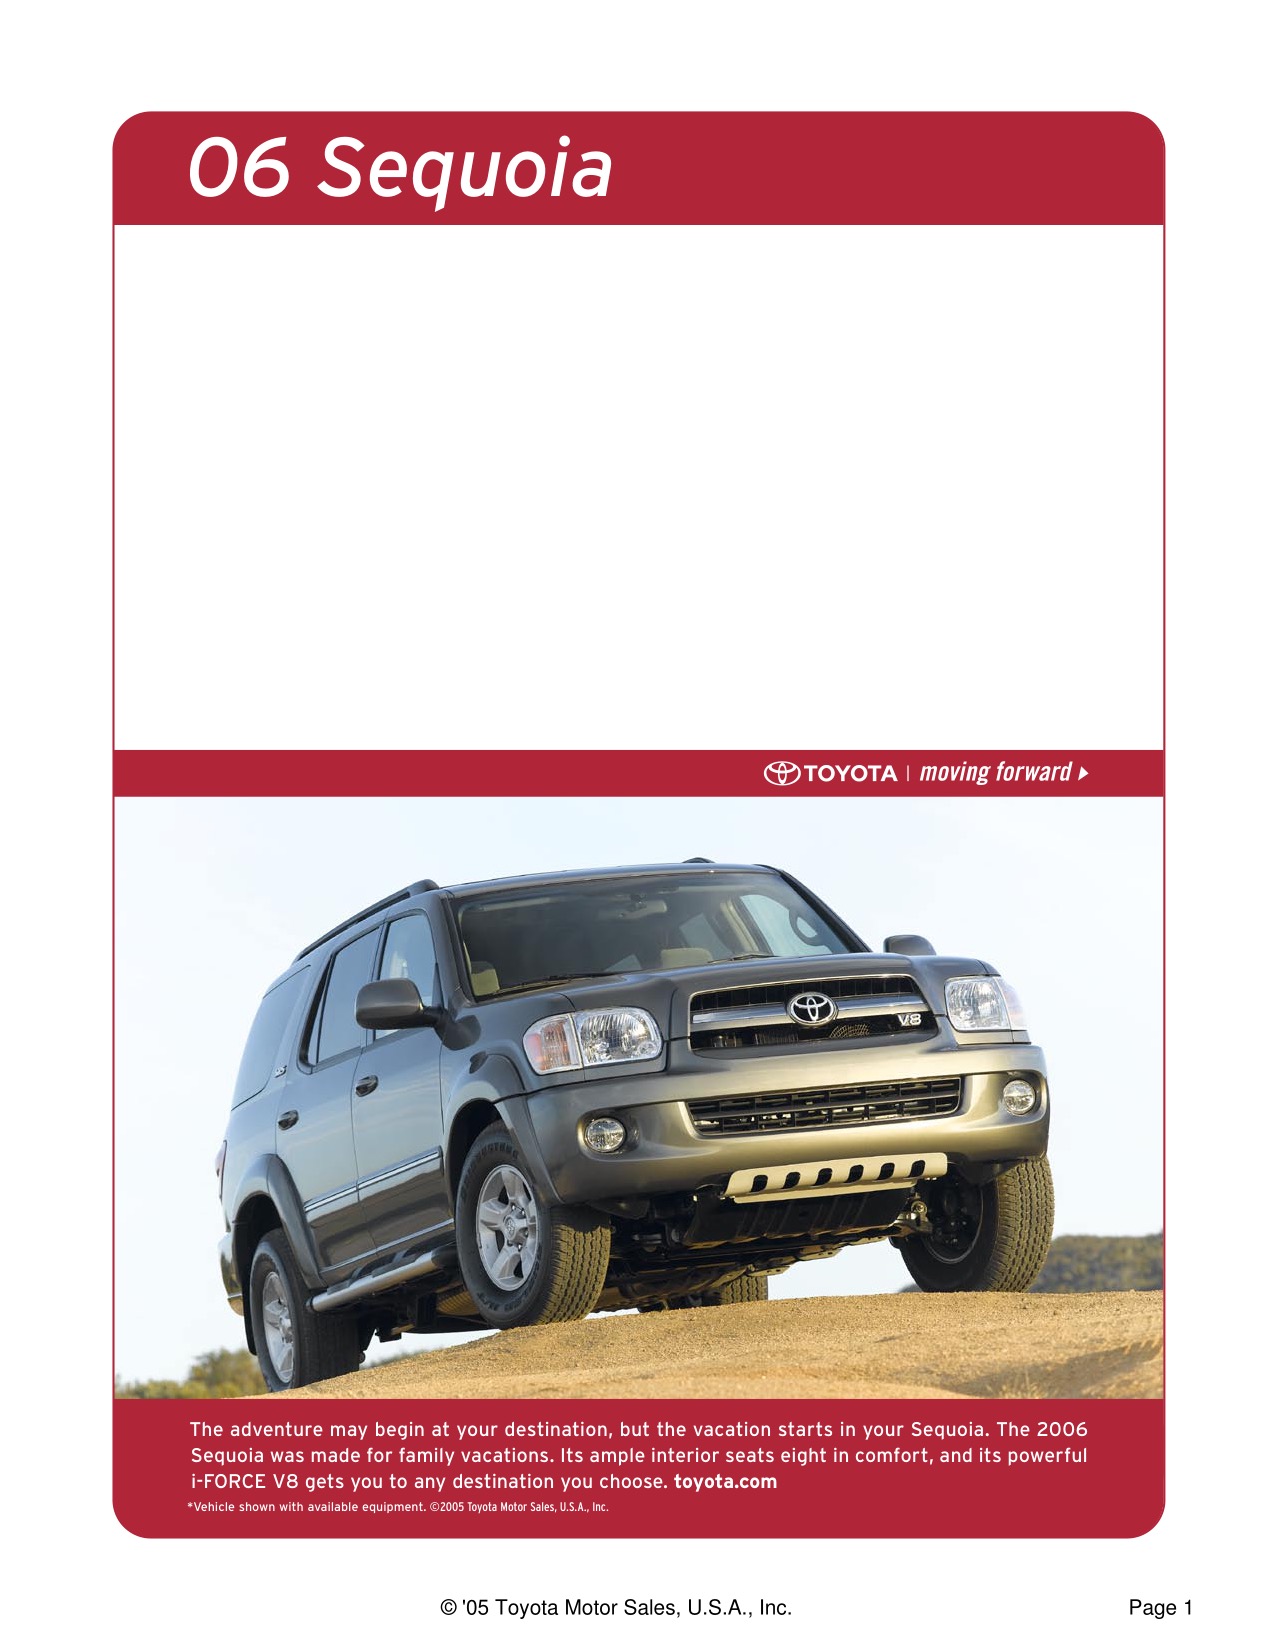 2006 Toyota Sequoia Brochure Page 14